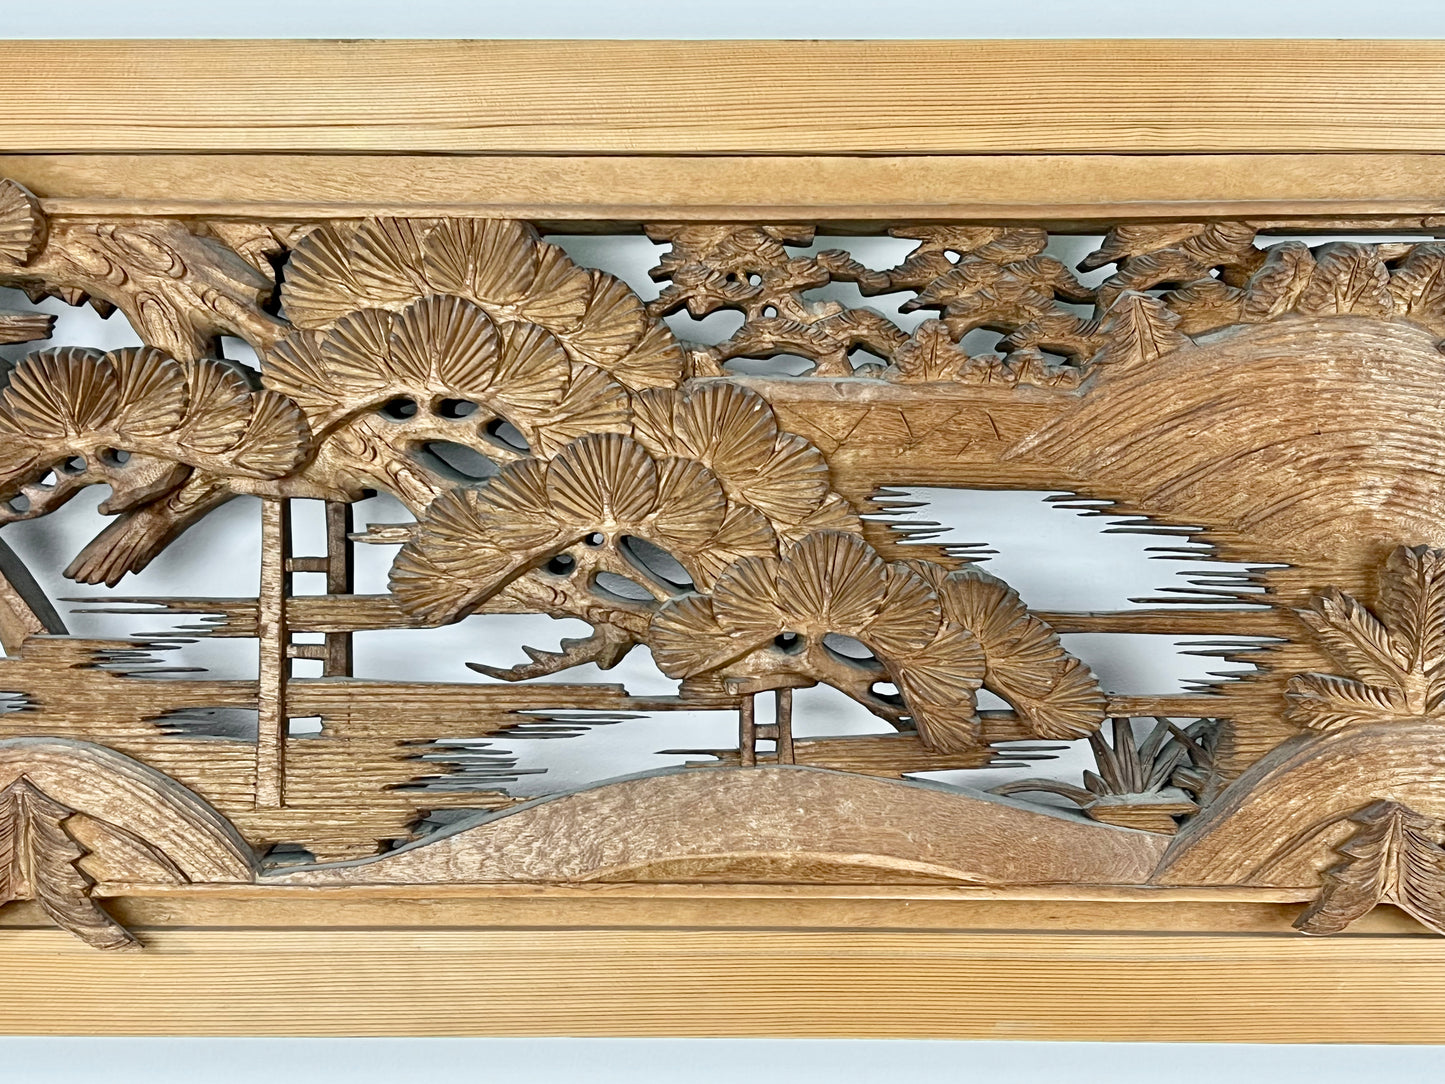 Rare Japanese Ranma Pair Deeply Carved Transom Screen Sugi Wood 68"